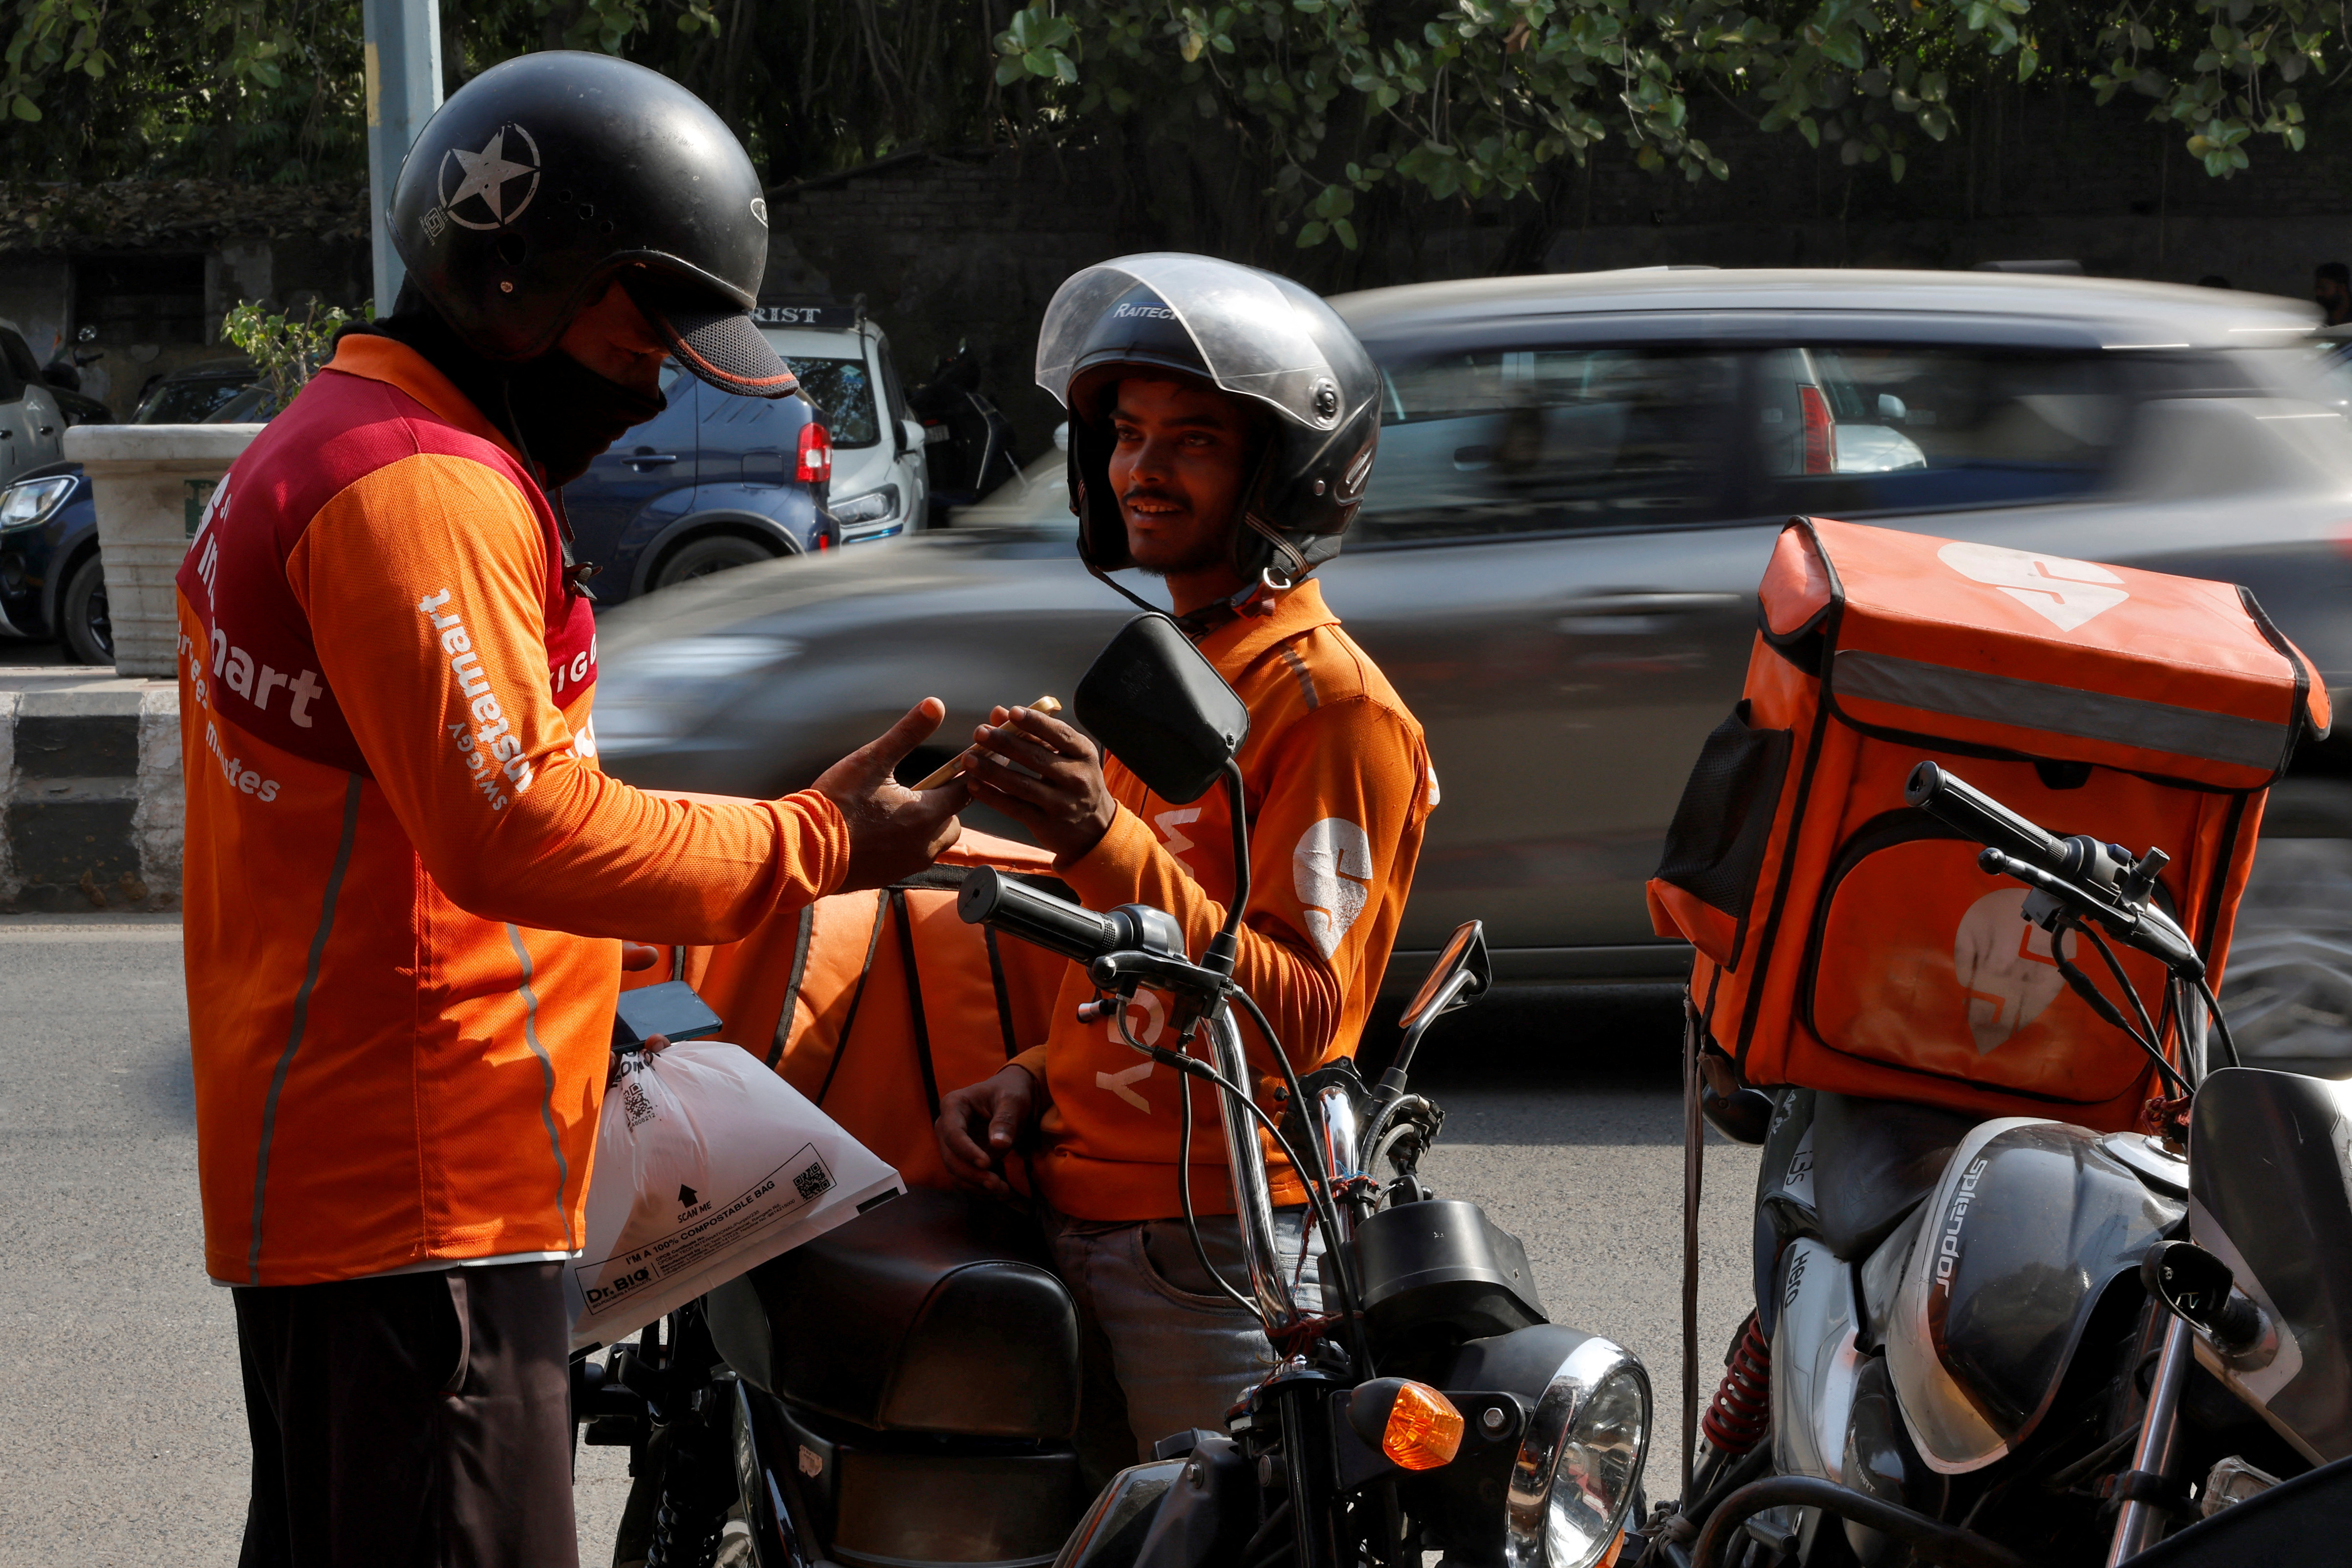 Gig workers prepare to deliver orders outside Swiggy's grocery warehouse, in New Delhi